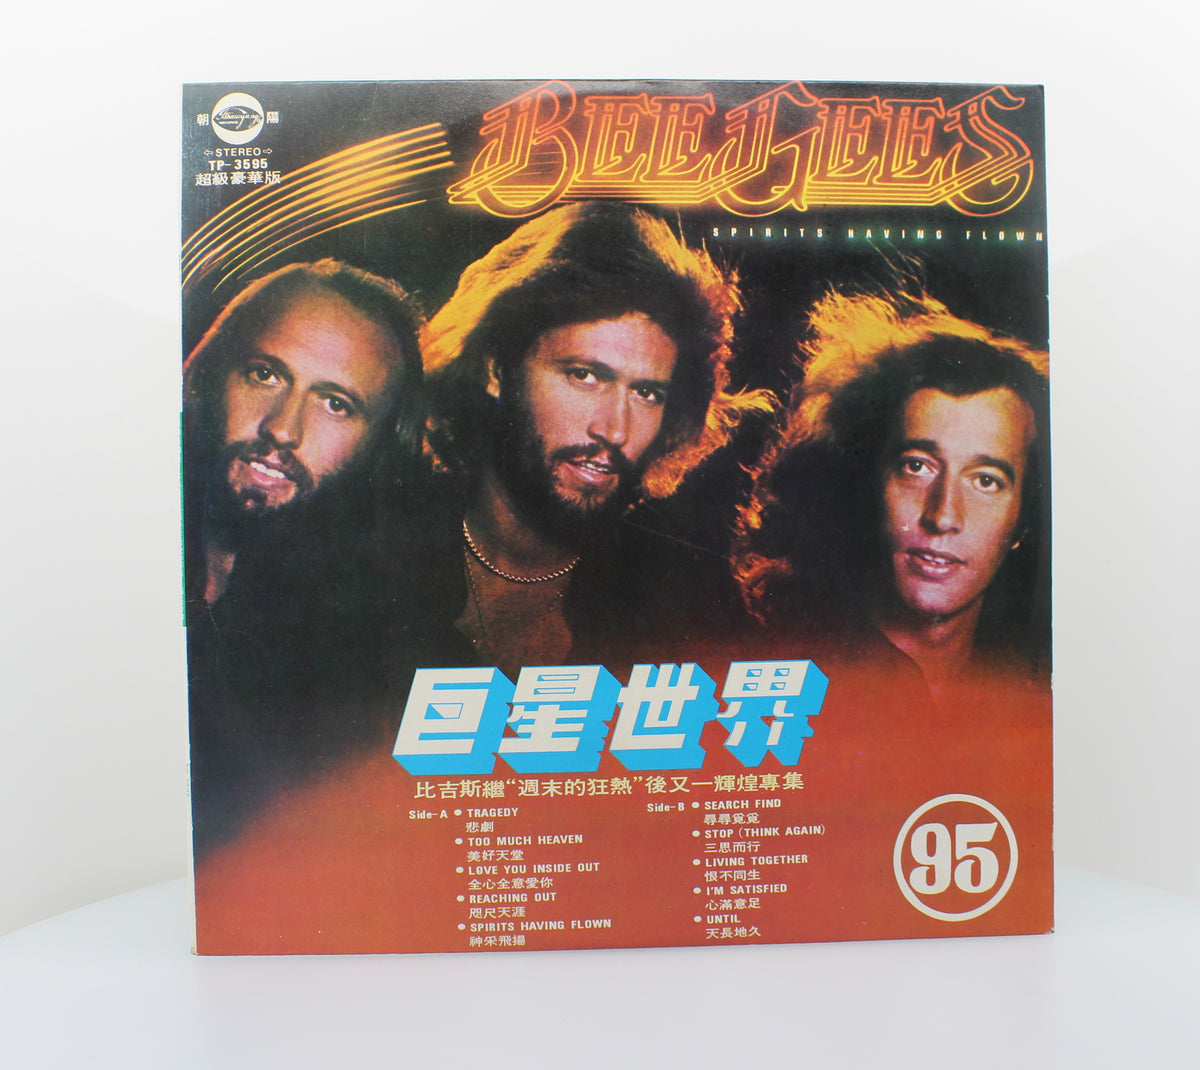 Bee Gees, Vinyl LP (33⅓rpm), Taiwan, Unofficial Release